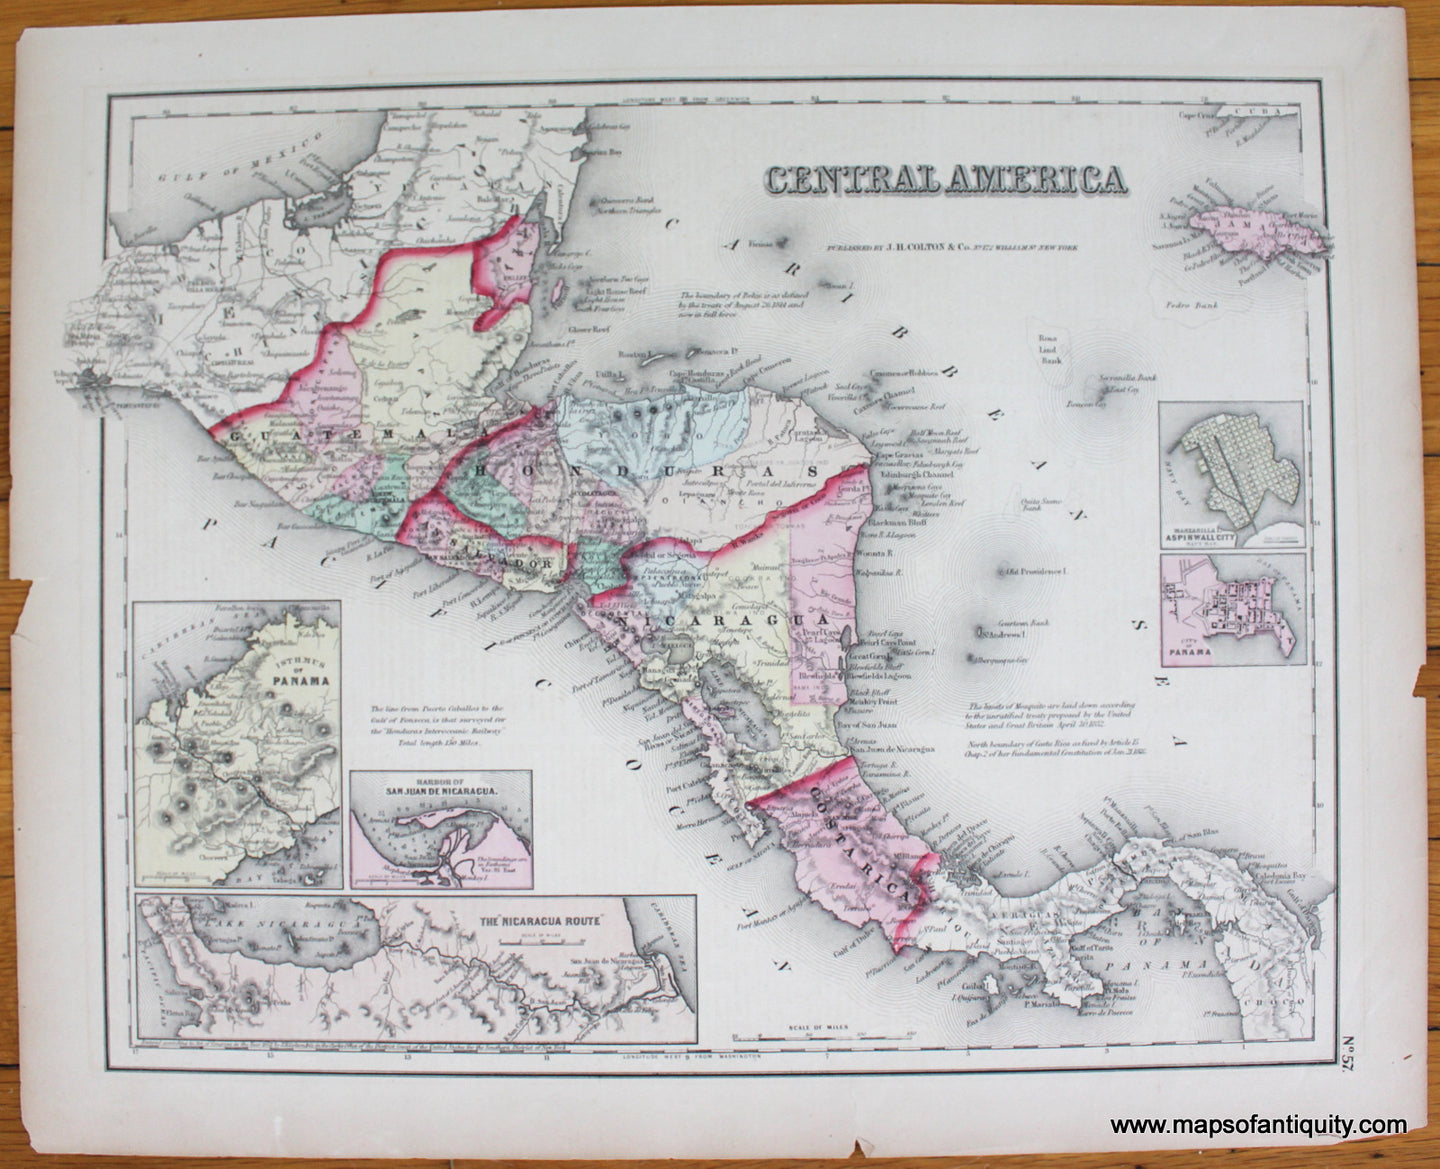 Maps-Antiquity-Antique-Map-Colton-Central-America-1856-1850s-1800s-19th-Century